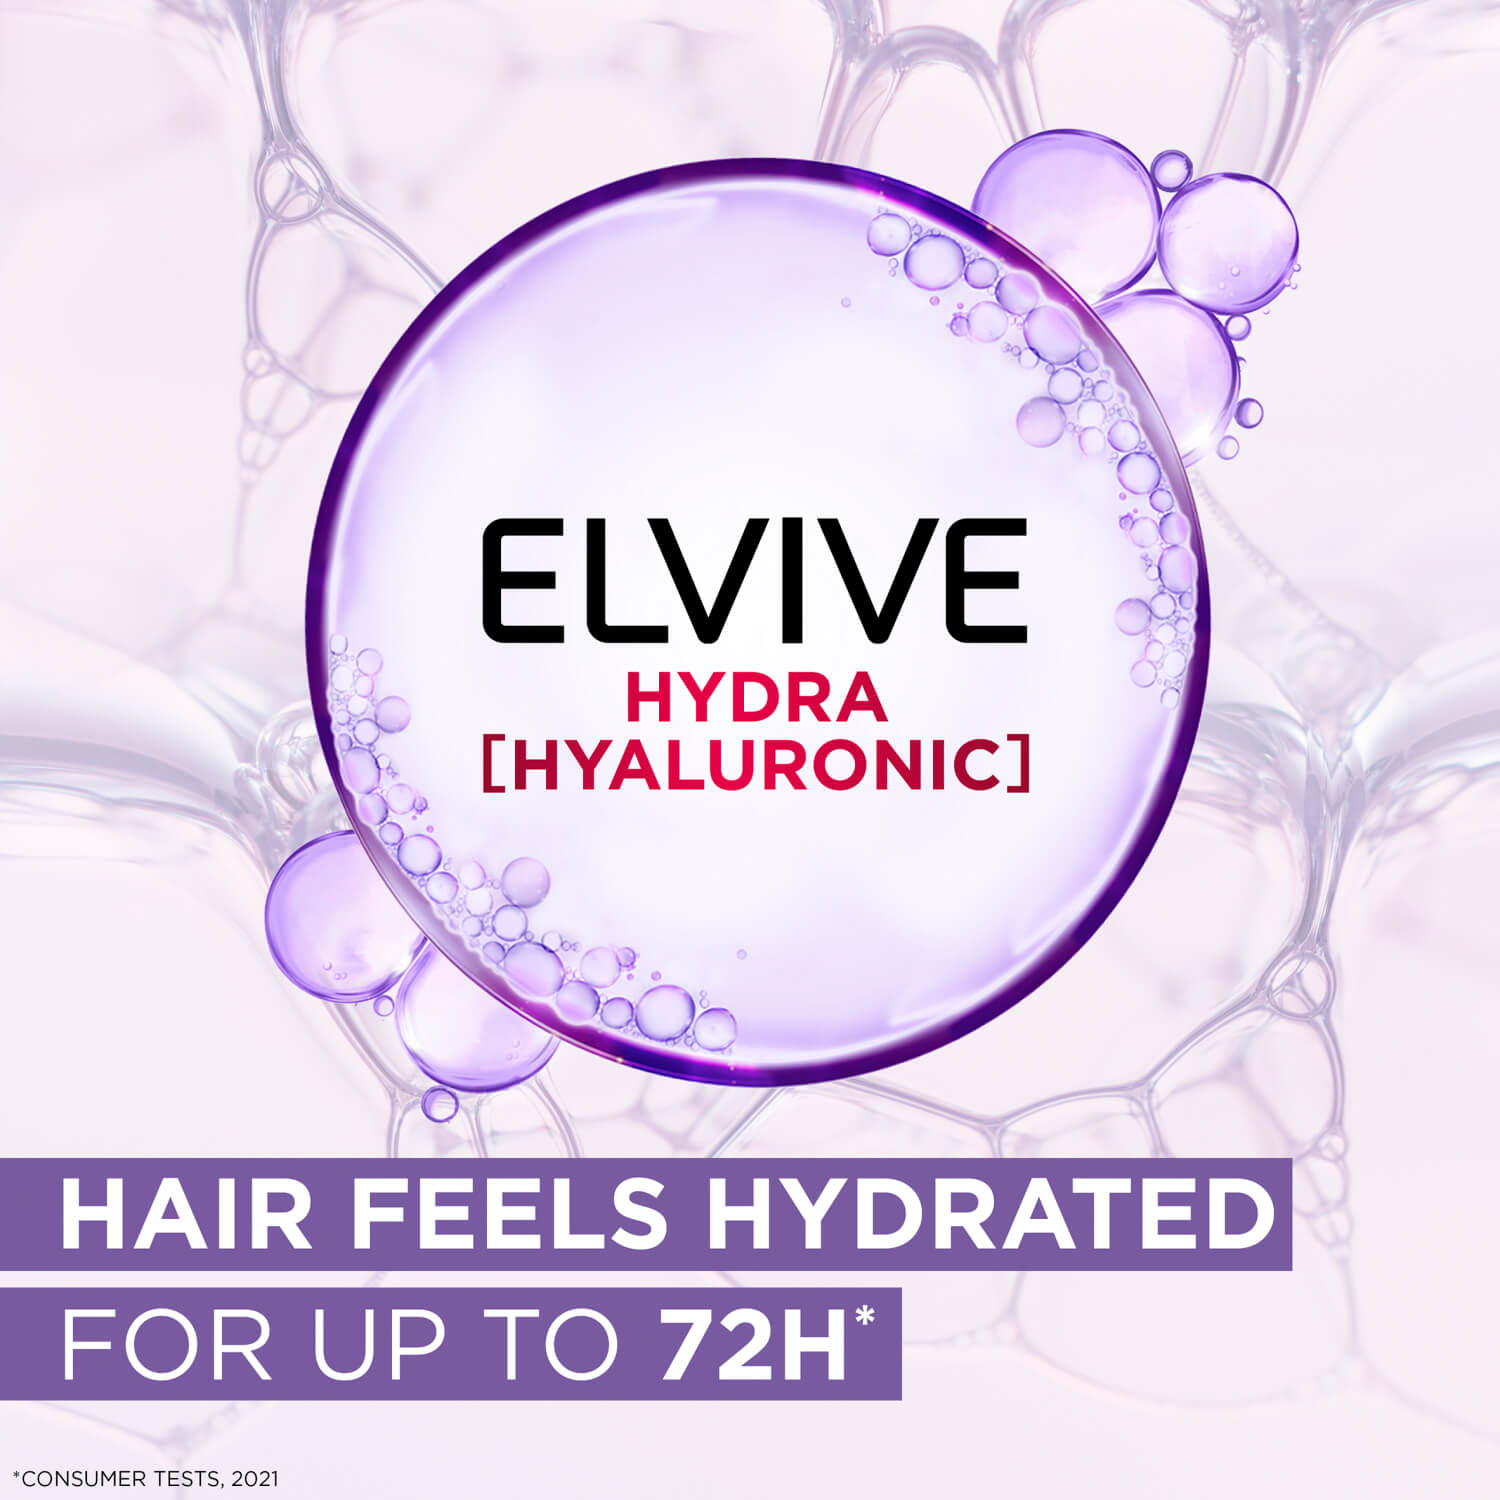 L’ Oréal Hydra Hyaluronic Hair Mask With Hyaluronic Acid For Dry Hair - 300ml 3 Shaws Department Stores